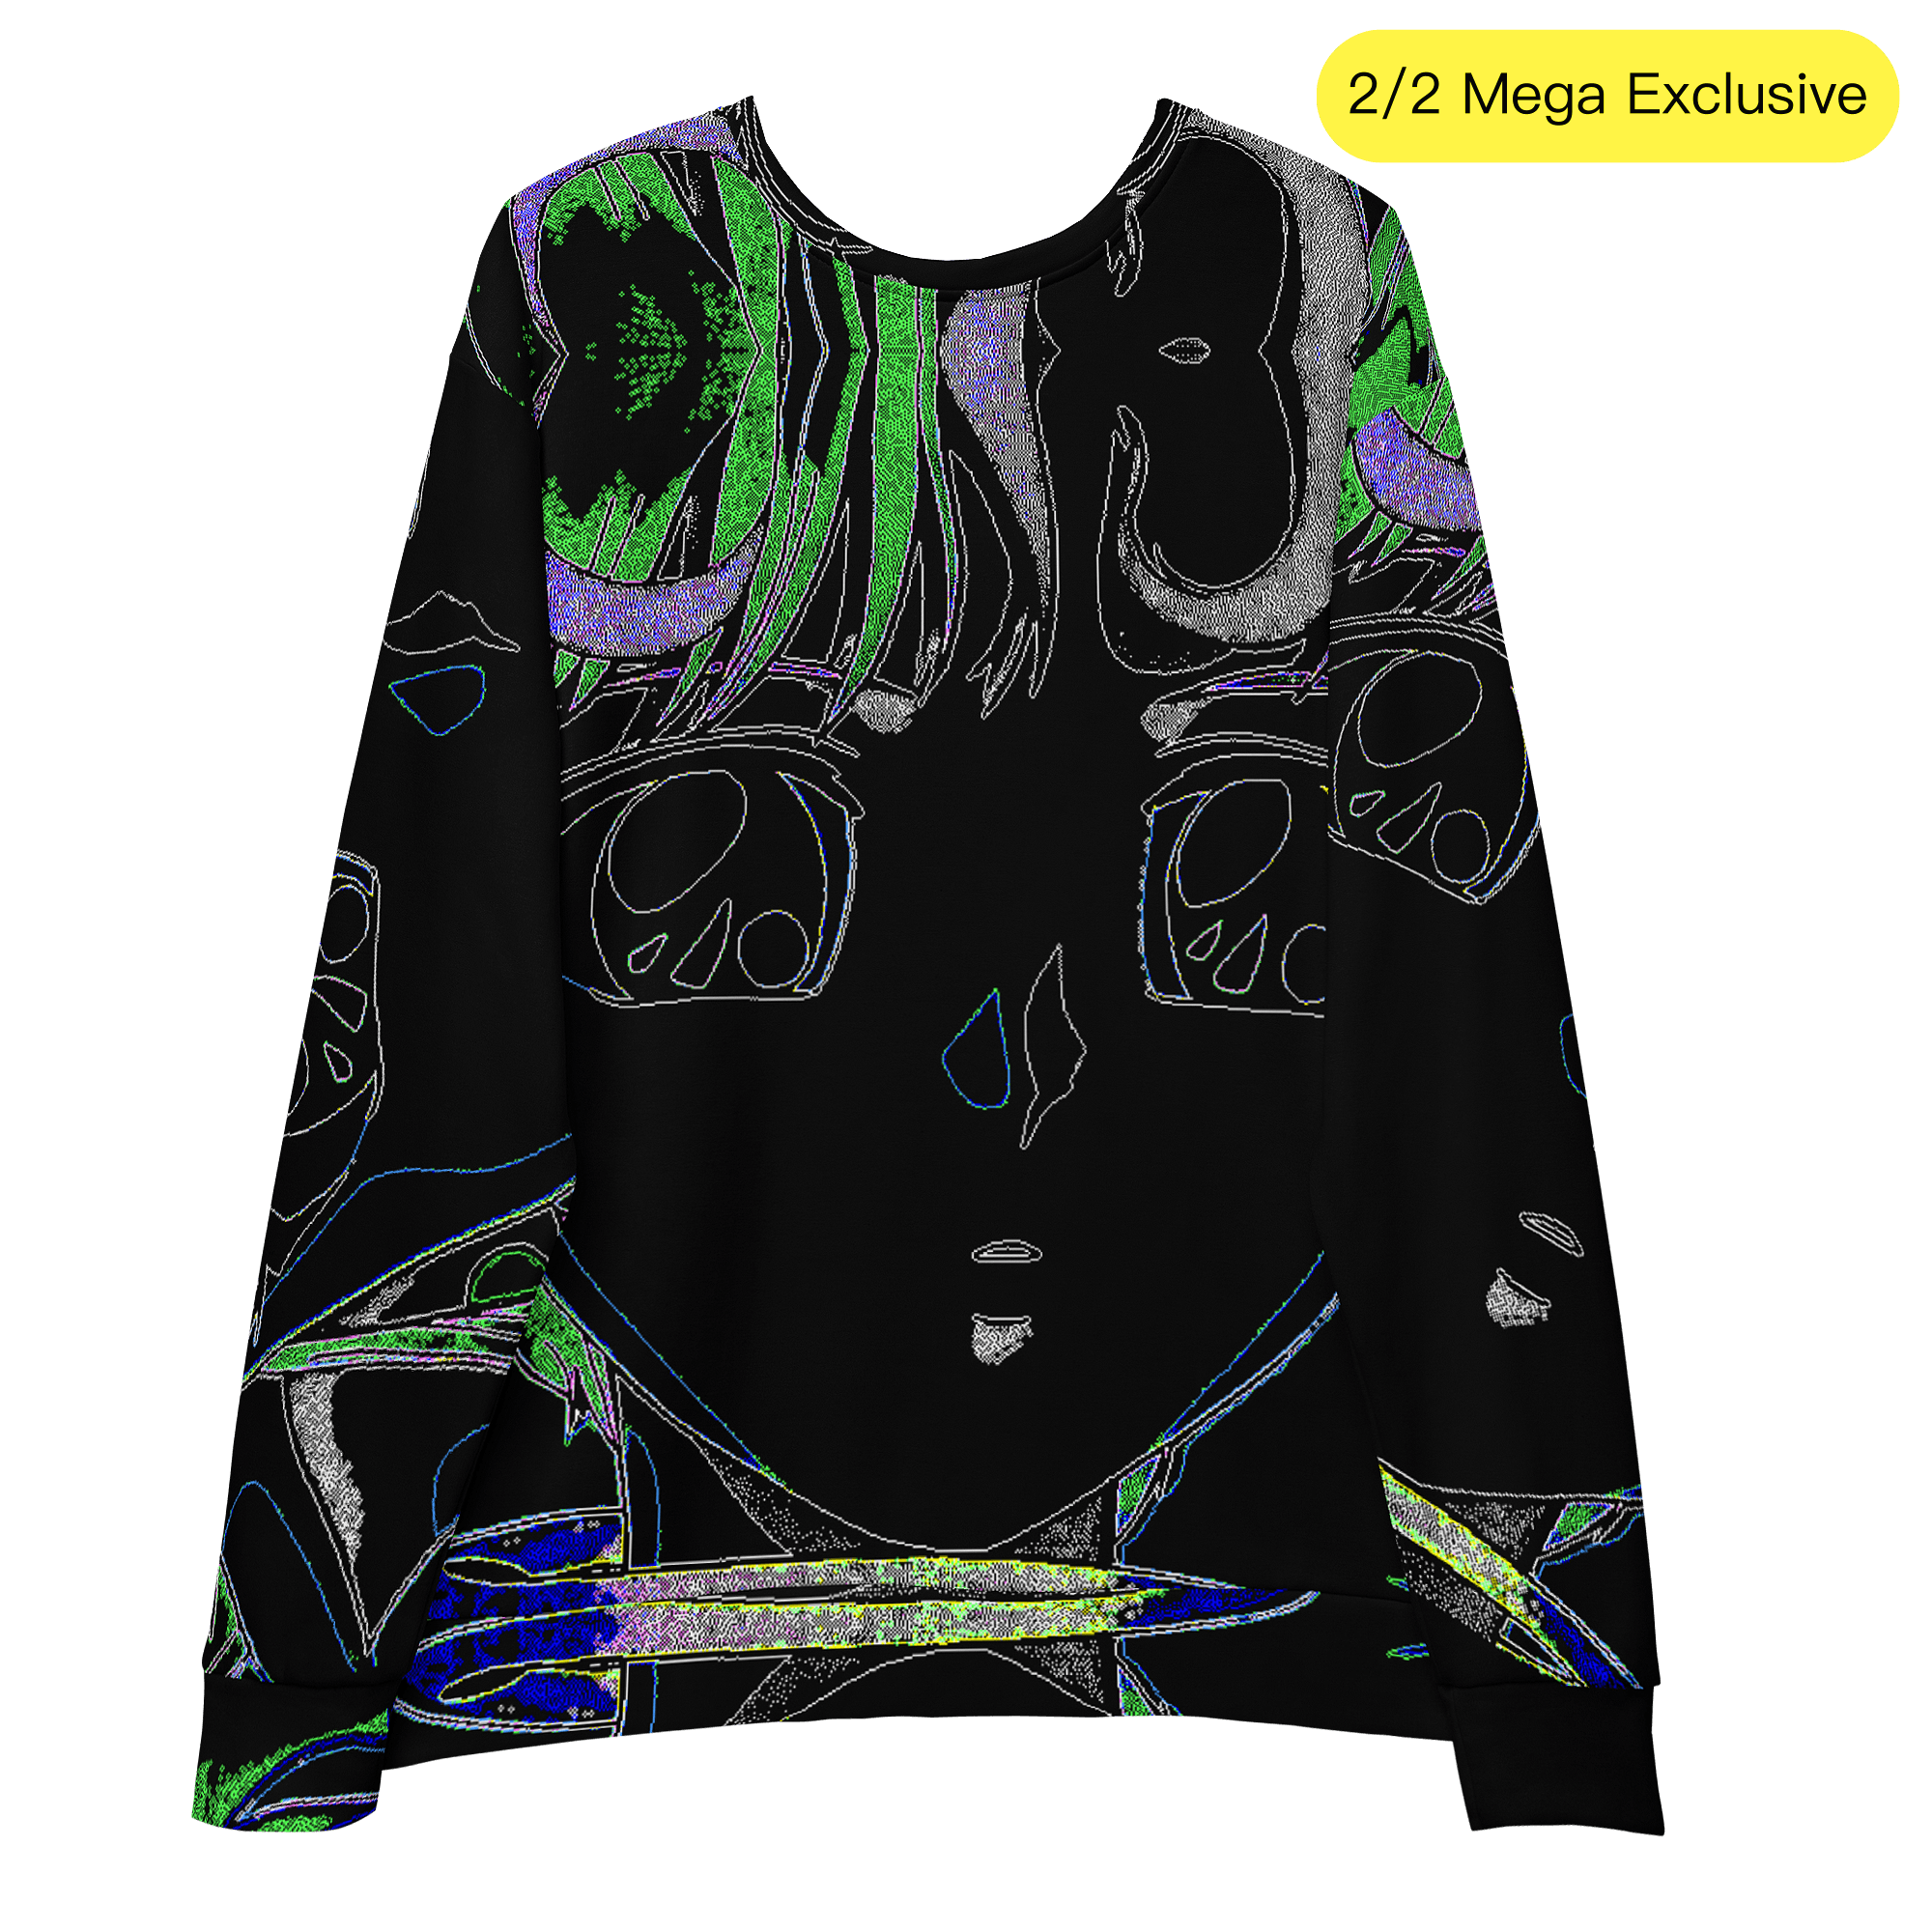 You're so cold® Deluxe Light Sweatshirt (2 pieces only 2/2) ⭐️ - Kikillo Club